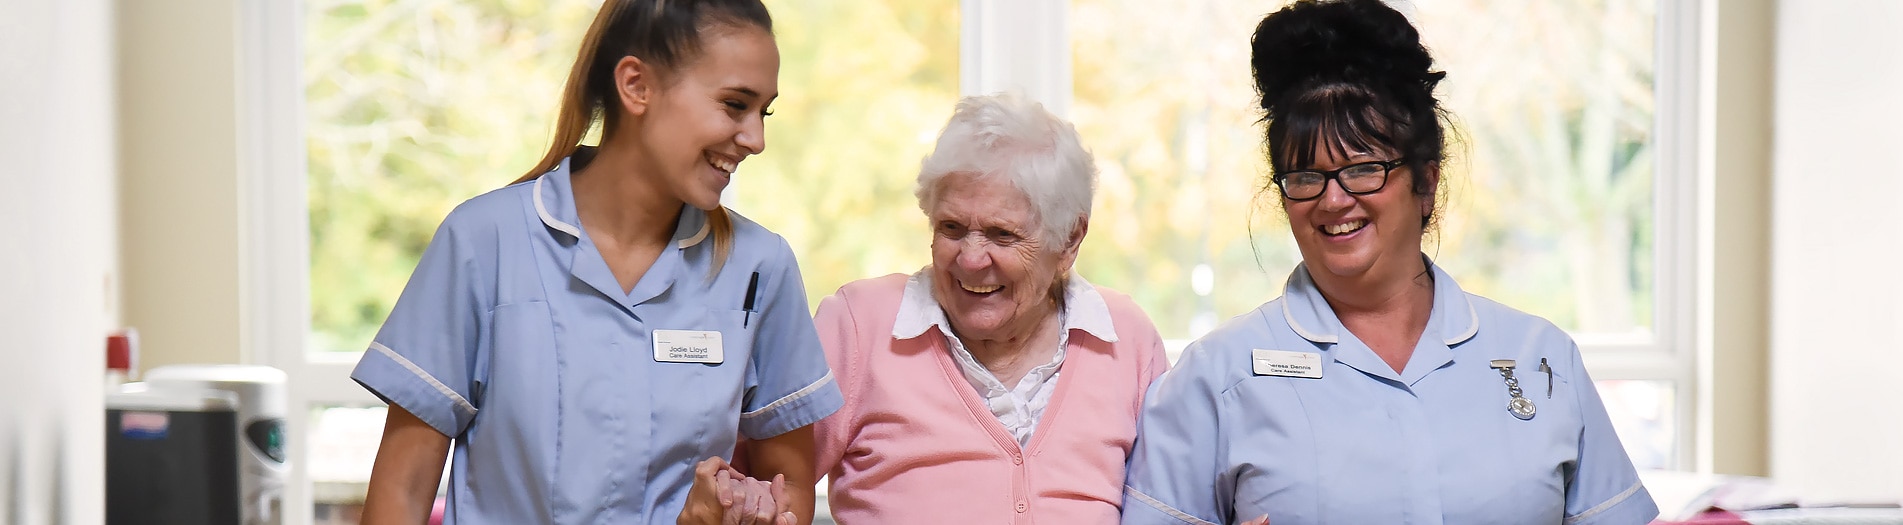 Standards of care at Coverage Care Services